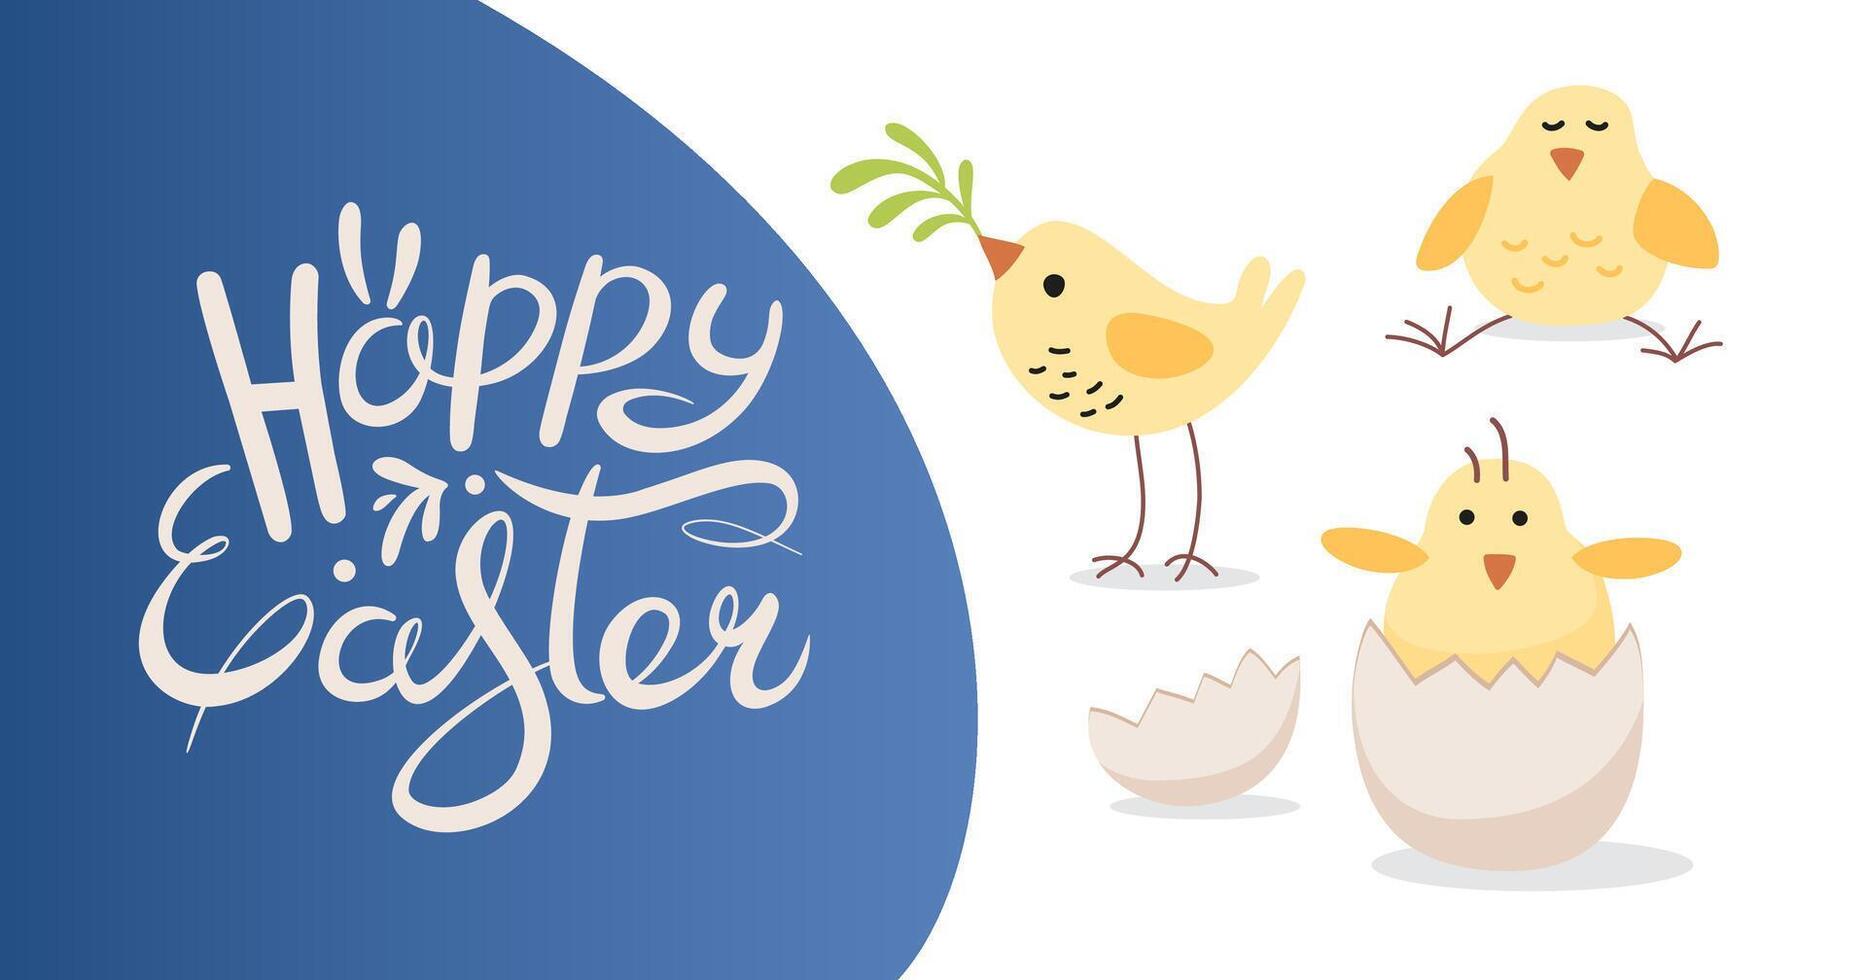 Easter web banner with little Easter birds. Cute yellow chickens. Hand drawn lettering. Simple Horizontal greeting banner. Festive background for invitations. Vector flat illustration.